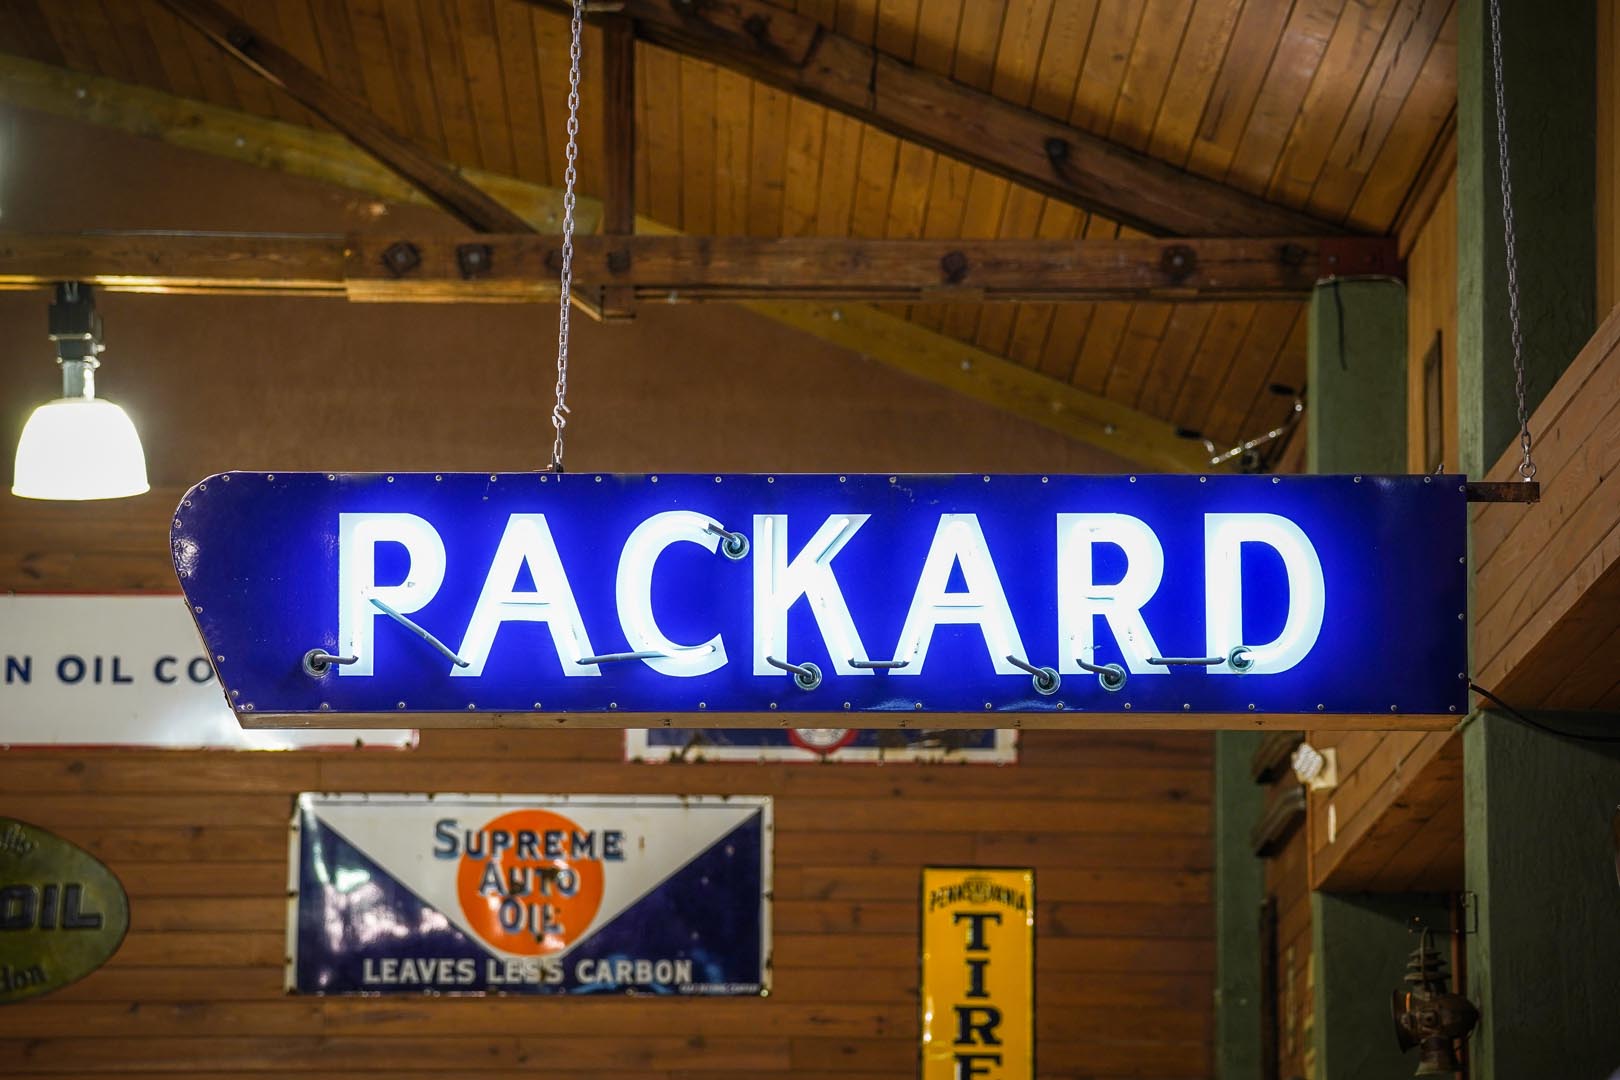  Packard Large Double-Sided Por celain Neon Sign 